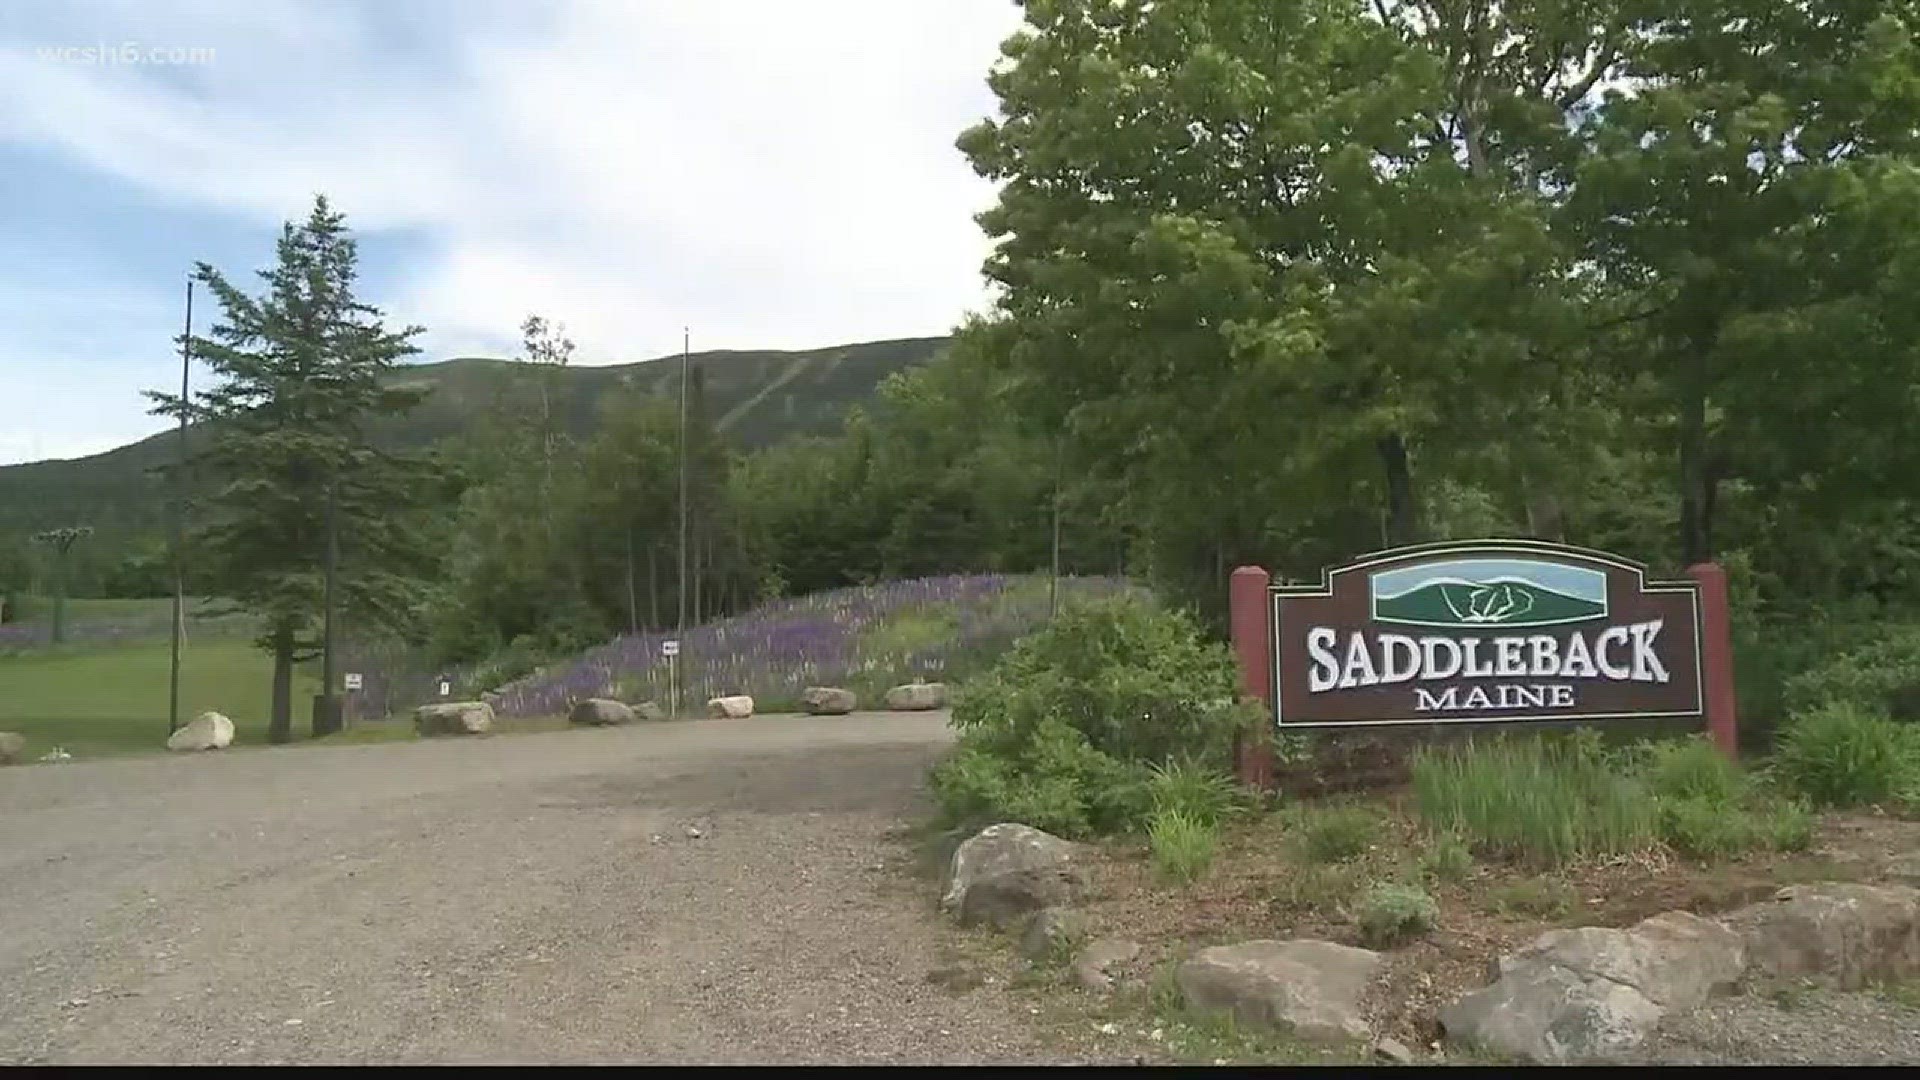 Four months later, the sale of Saddleback Mountain still isn't final.